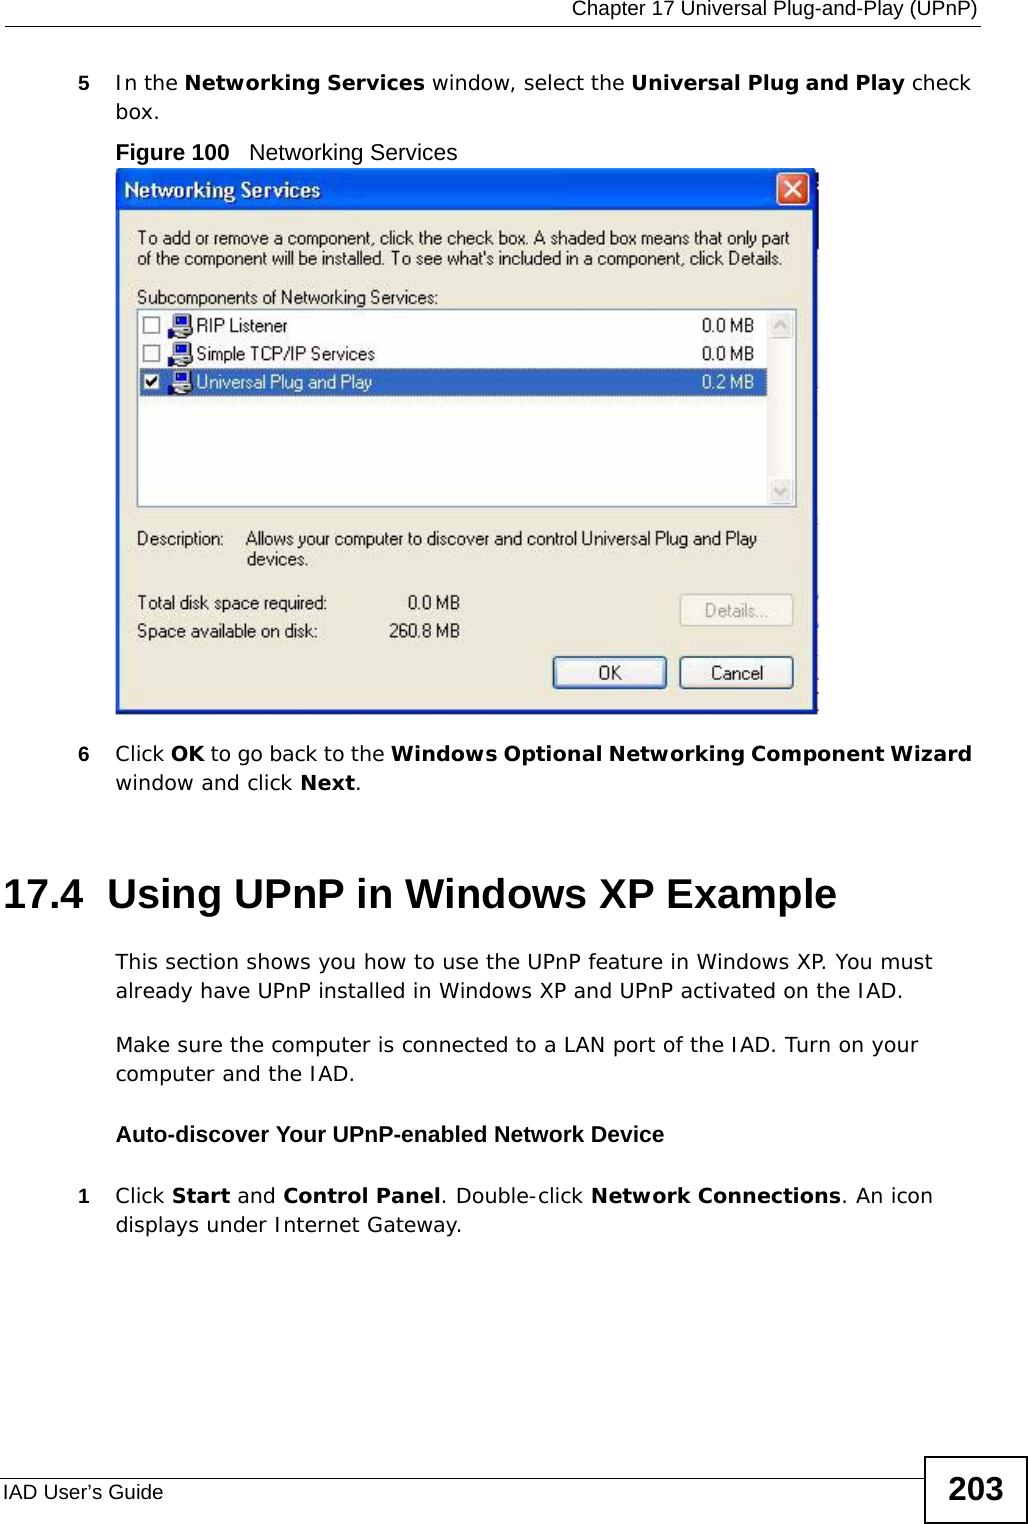  Chapter 17 Universal Plug-and-Play (UPnP)IAD User’s Guide 2035In the Networking Services window, select the Universal Plug and Play check box. Figure 100   Networking Services6Click OK to go back to the Windows Optional Networking Component Wizard window and click Next. 17.4  Using UPnP in Windows XP ExampleThis section shows you how to use the UPnP feature in Windows XP. You must already have UPnP installed in Windows XP and UPnP activated on the IAD.Make sure the computer is connected to a LAN port of the IAD. Turn on your computer and the IAD. Auto-discover Your UPnP-enabled Network Device1Click Start and Control Panel. Double-click Network Connections. An icon displays under Internet Gateway.